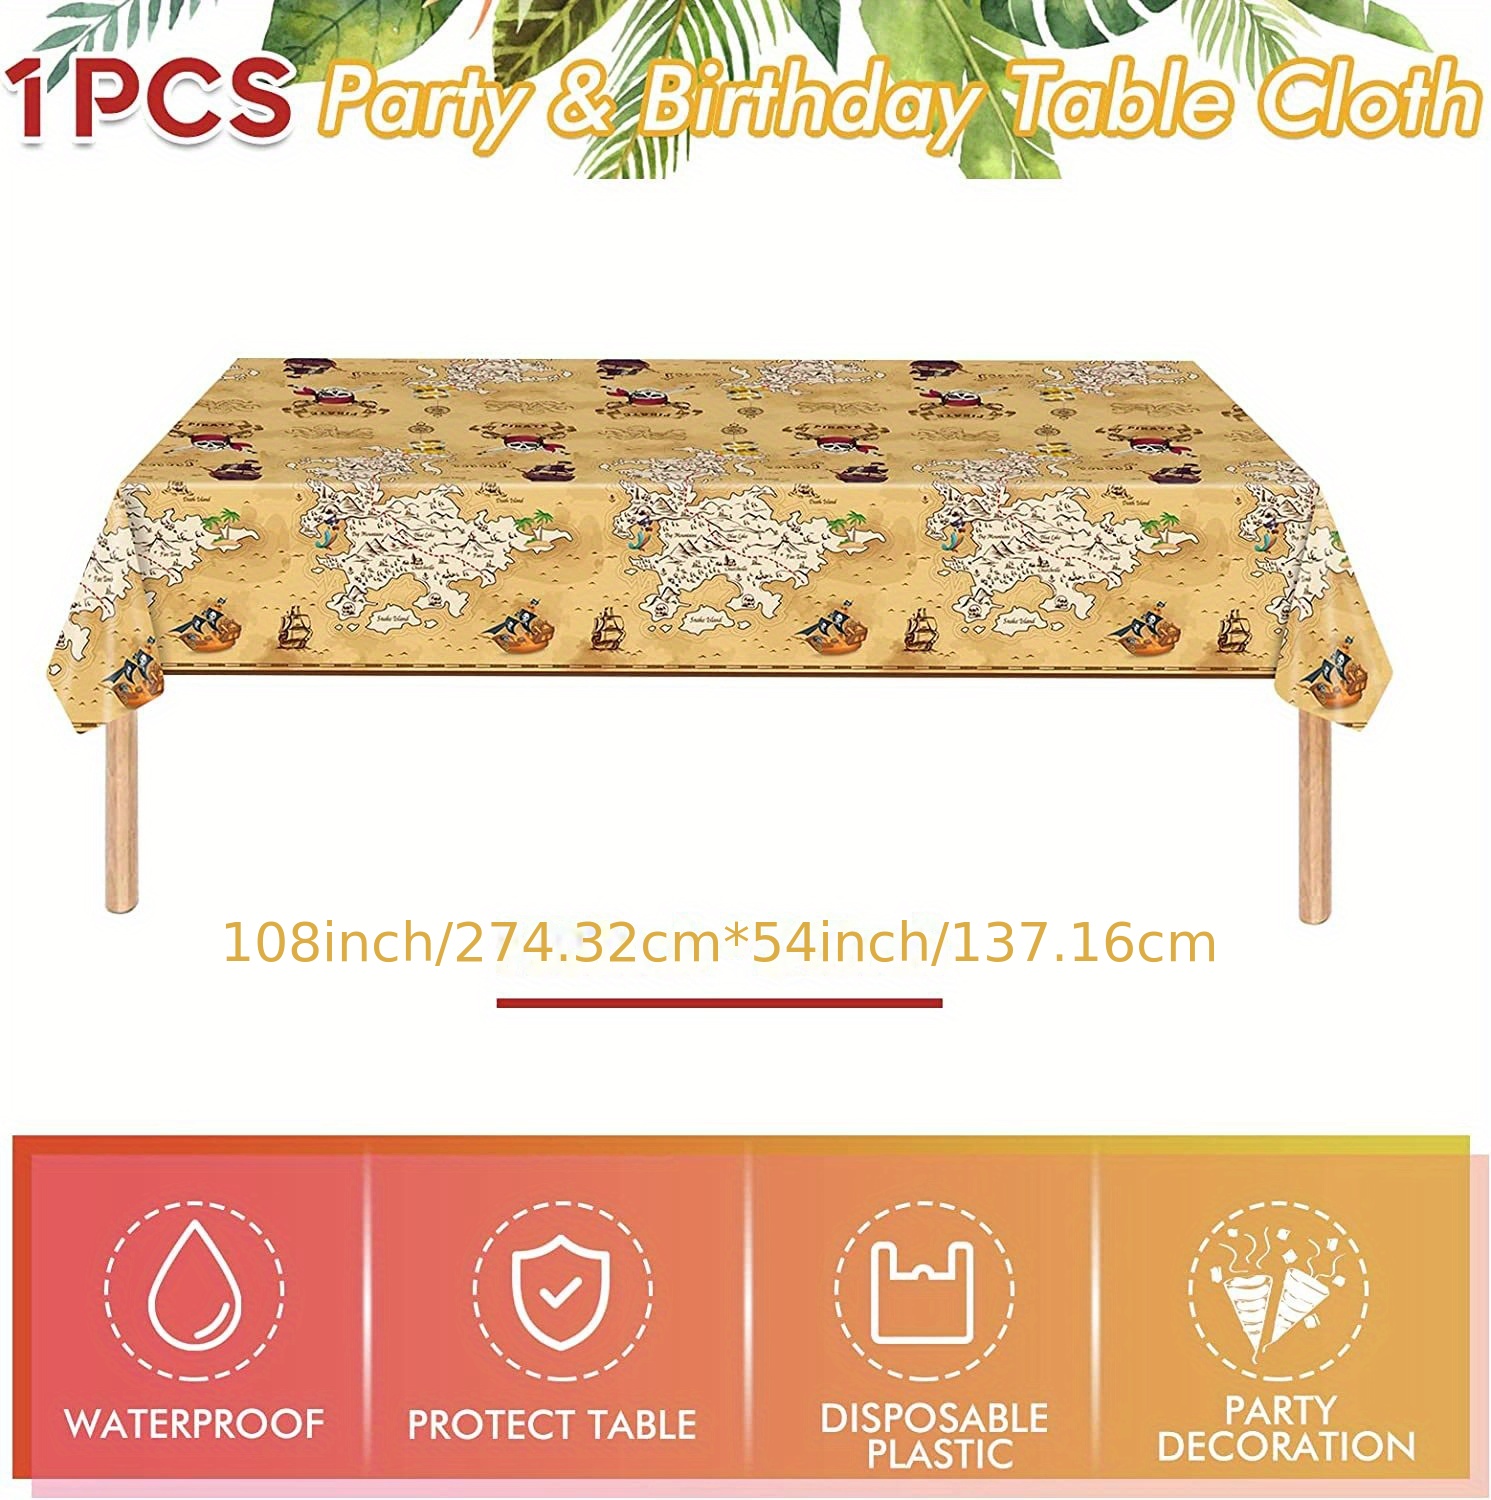 PAPER Table Cloths *PACK OF 2* Party Table Cloth Covers Disposable Birthday  